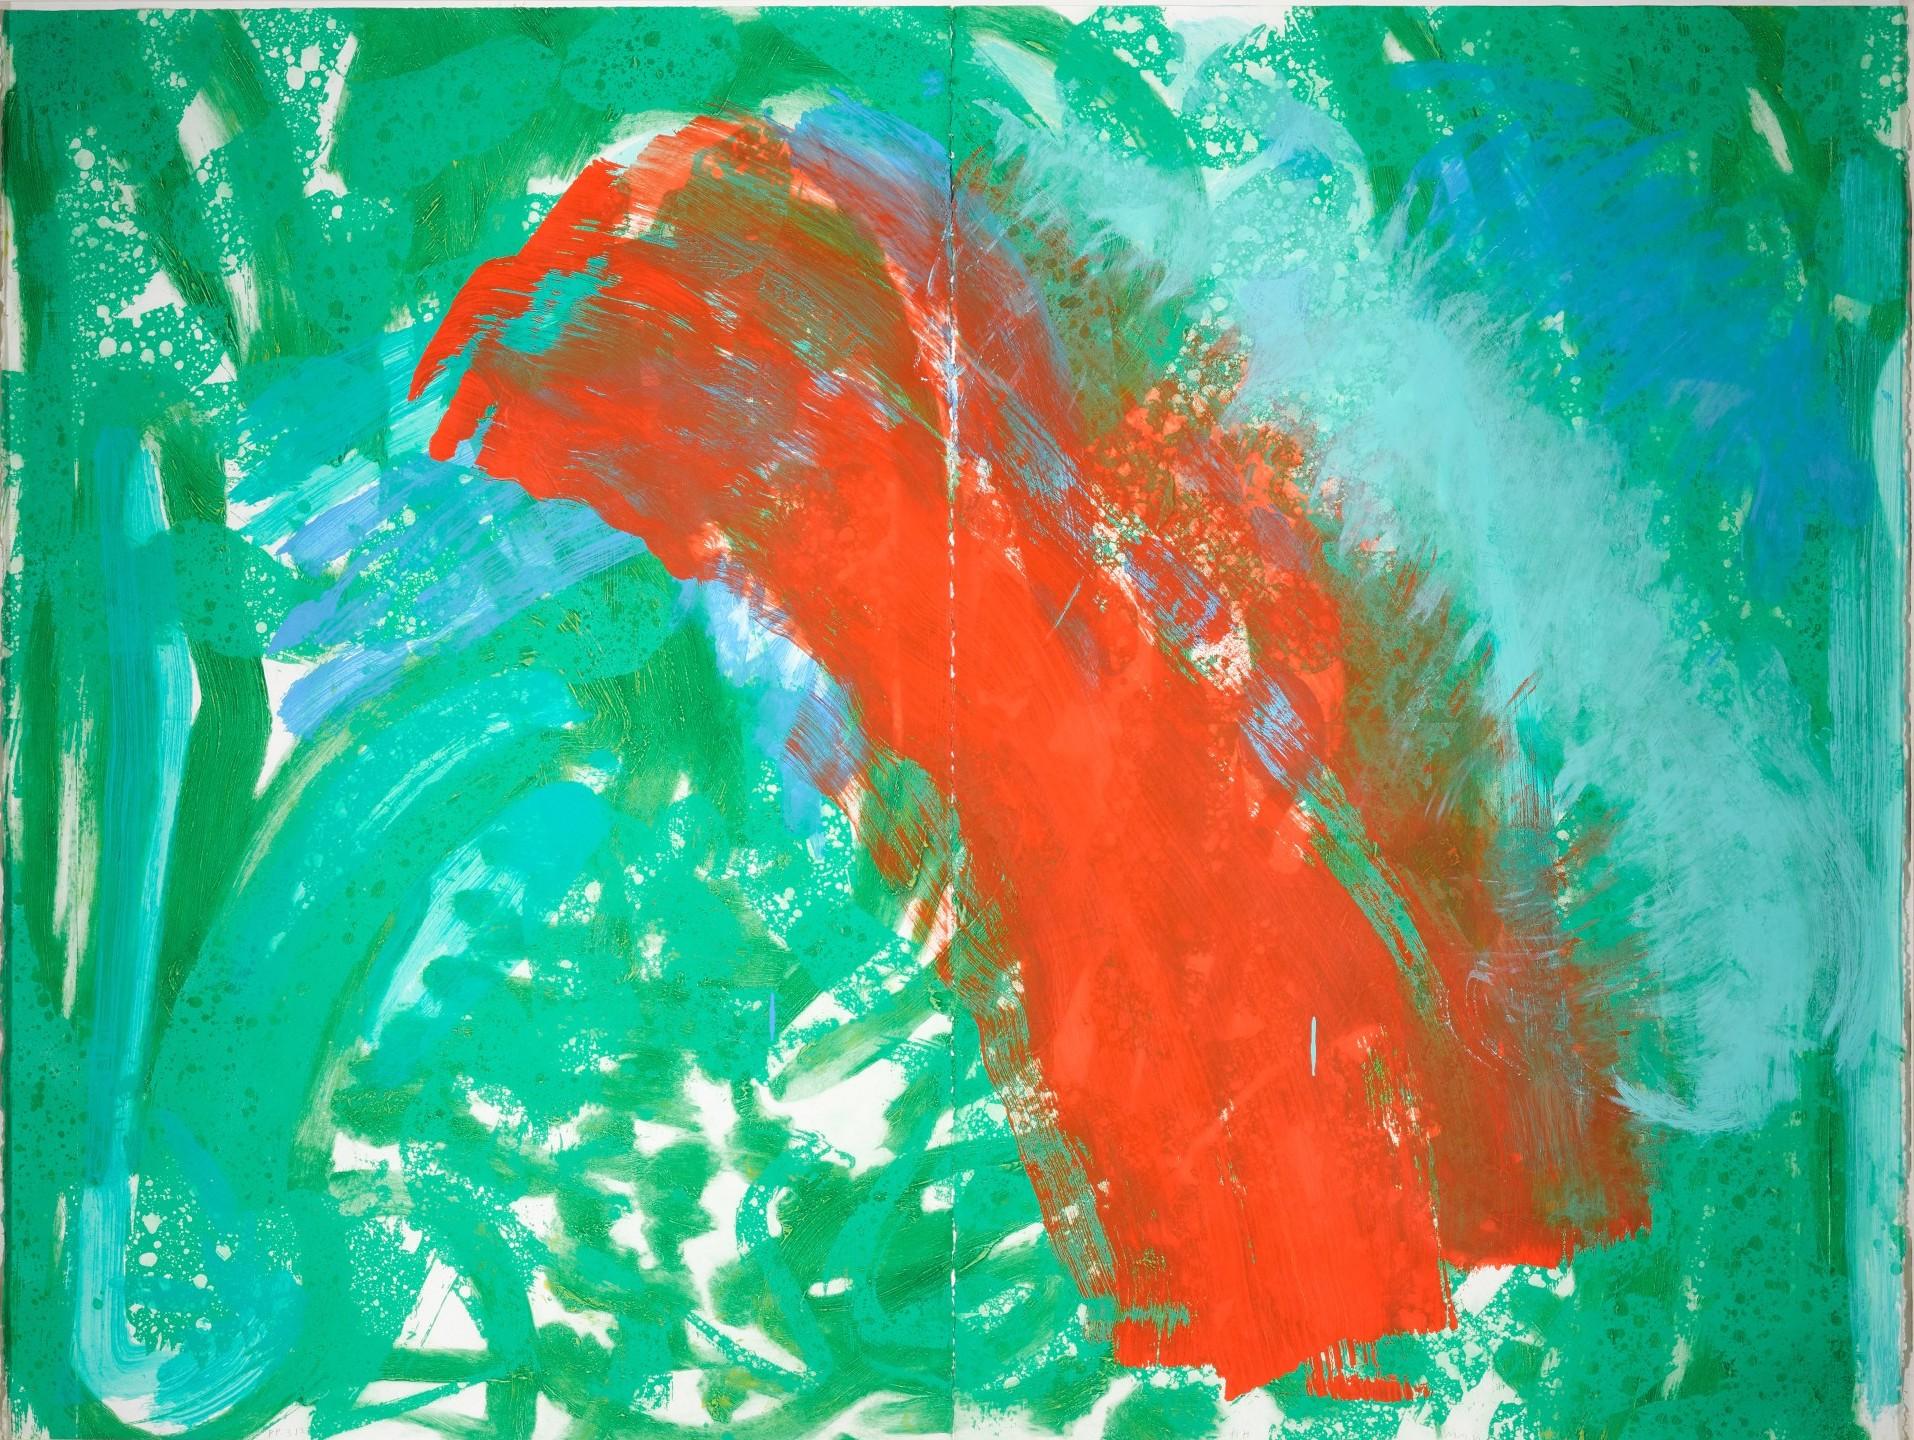 Into the Woods: Summer, 2001-02
Howard Hodgkin

Lift-ground etching with aquatint and carborundum printed in two shades of green, turquoise blue and zinc white, with hand-colouring in red, cerulean blue and zinc white, and bright opaque green and